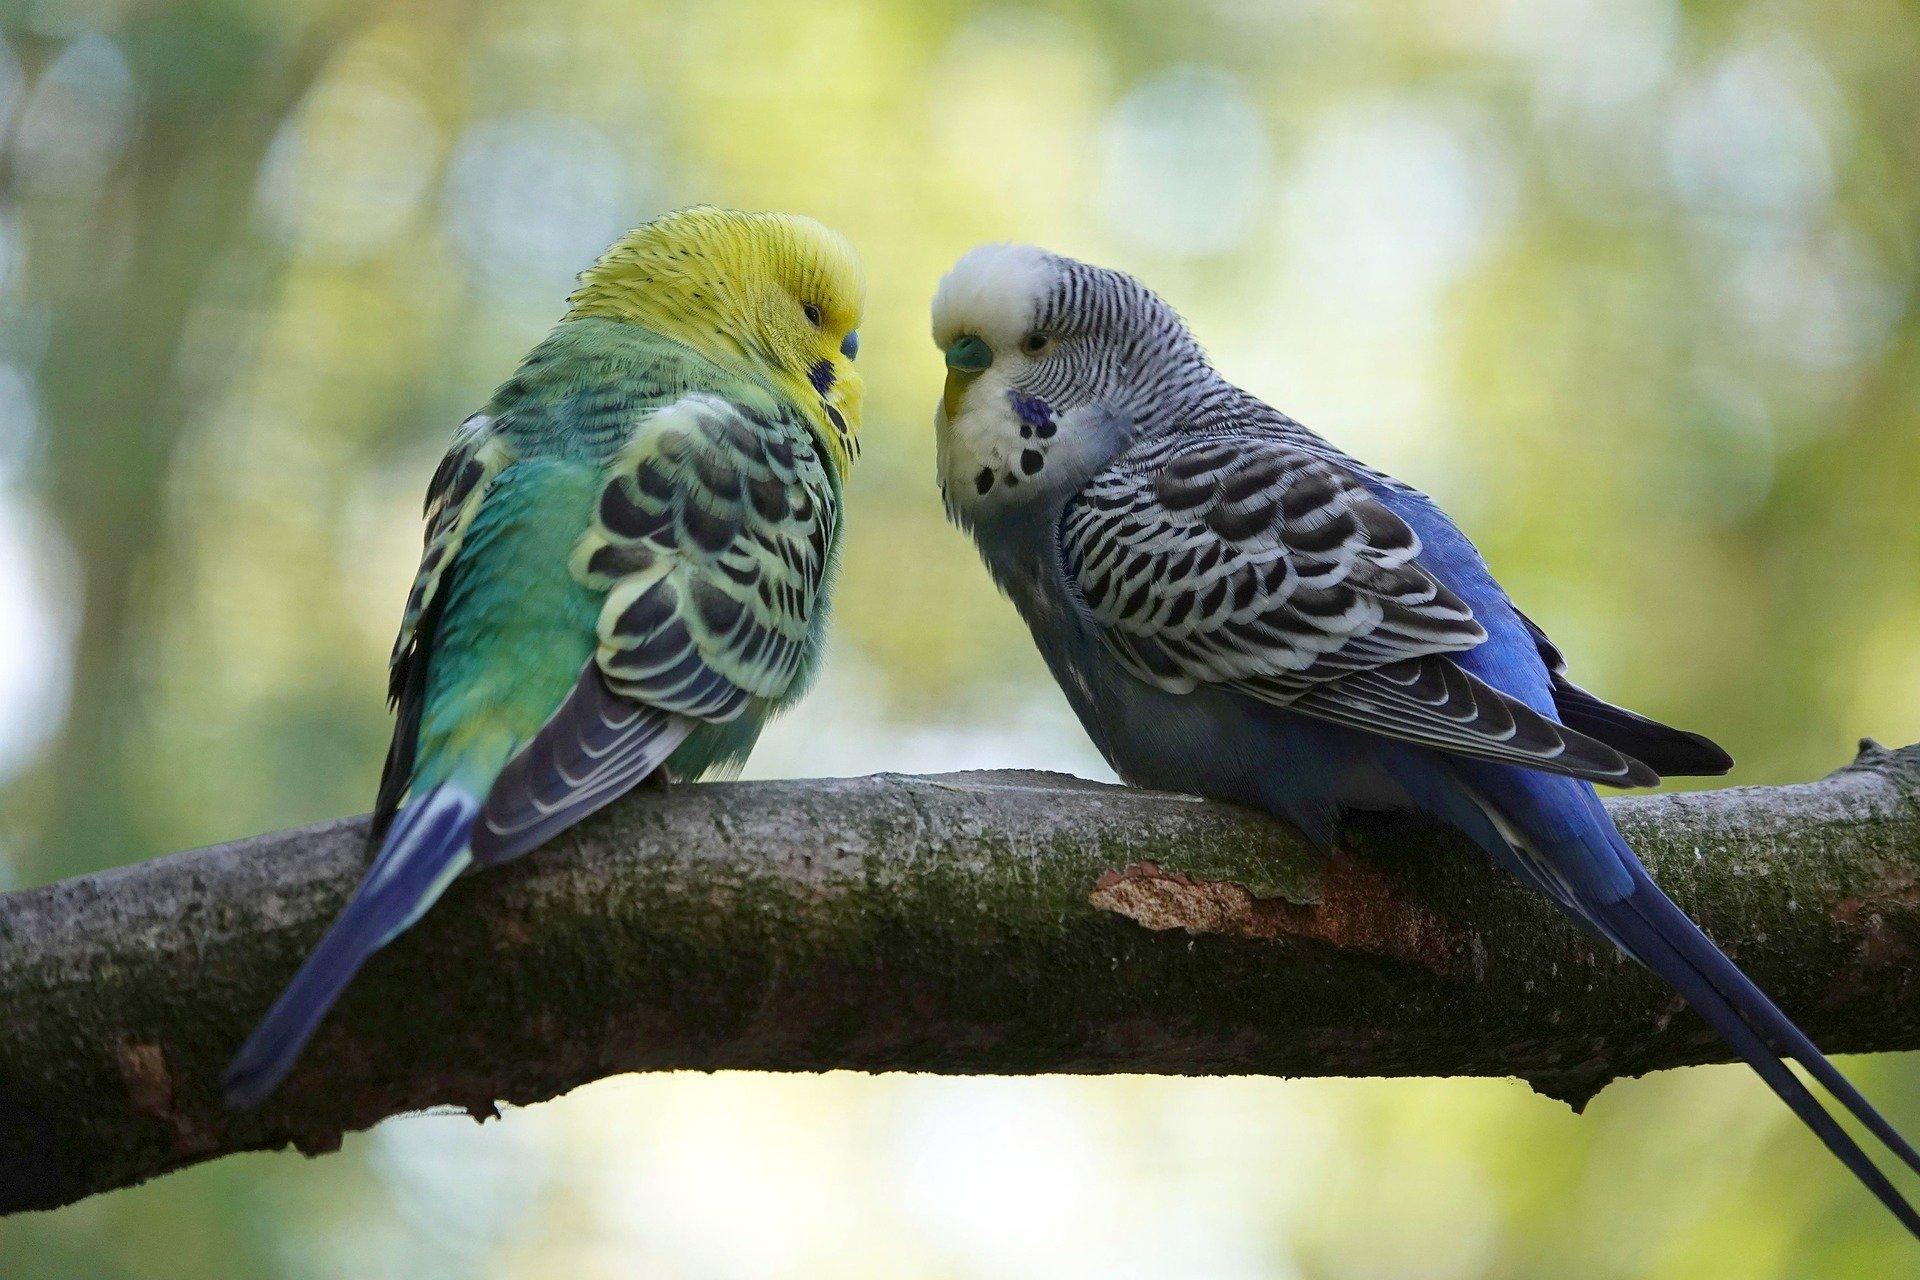 budgies on a branch - image